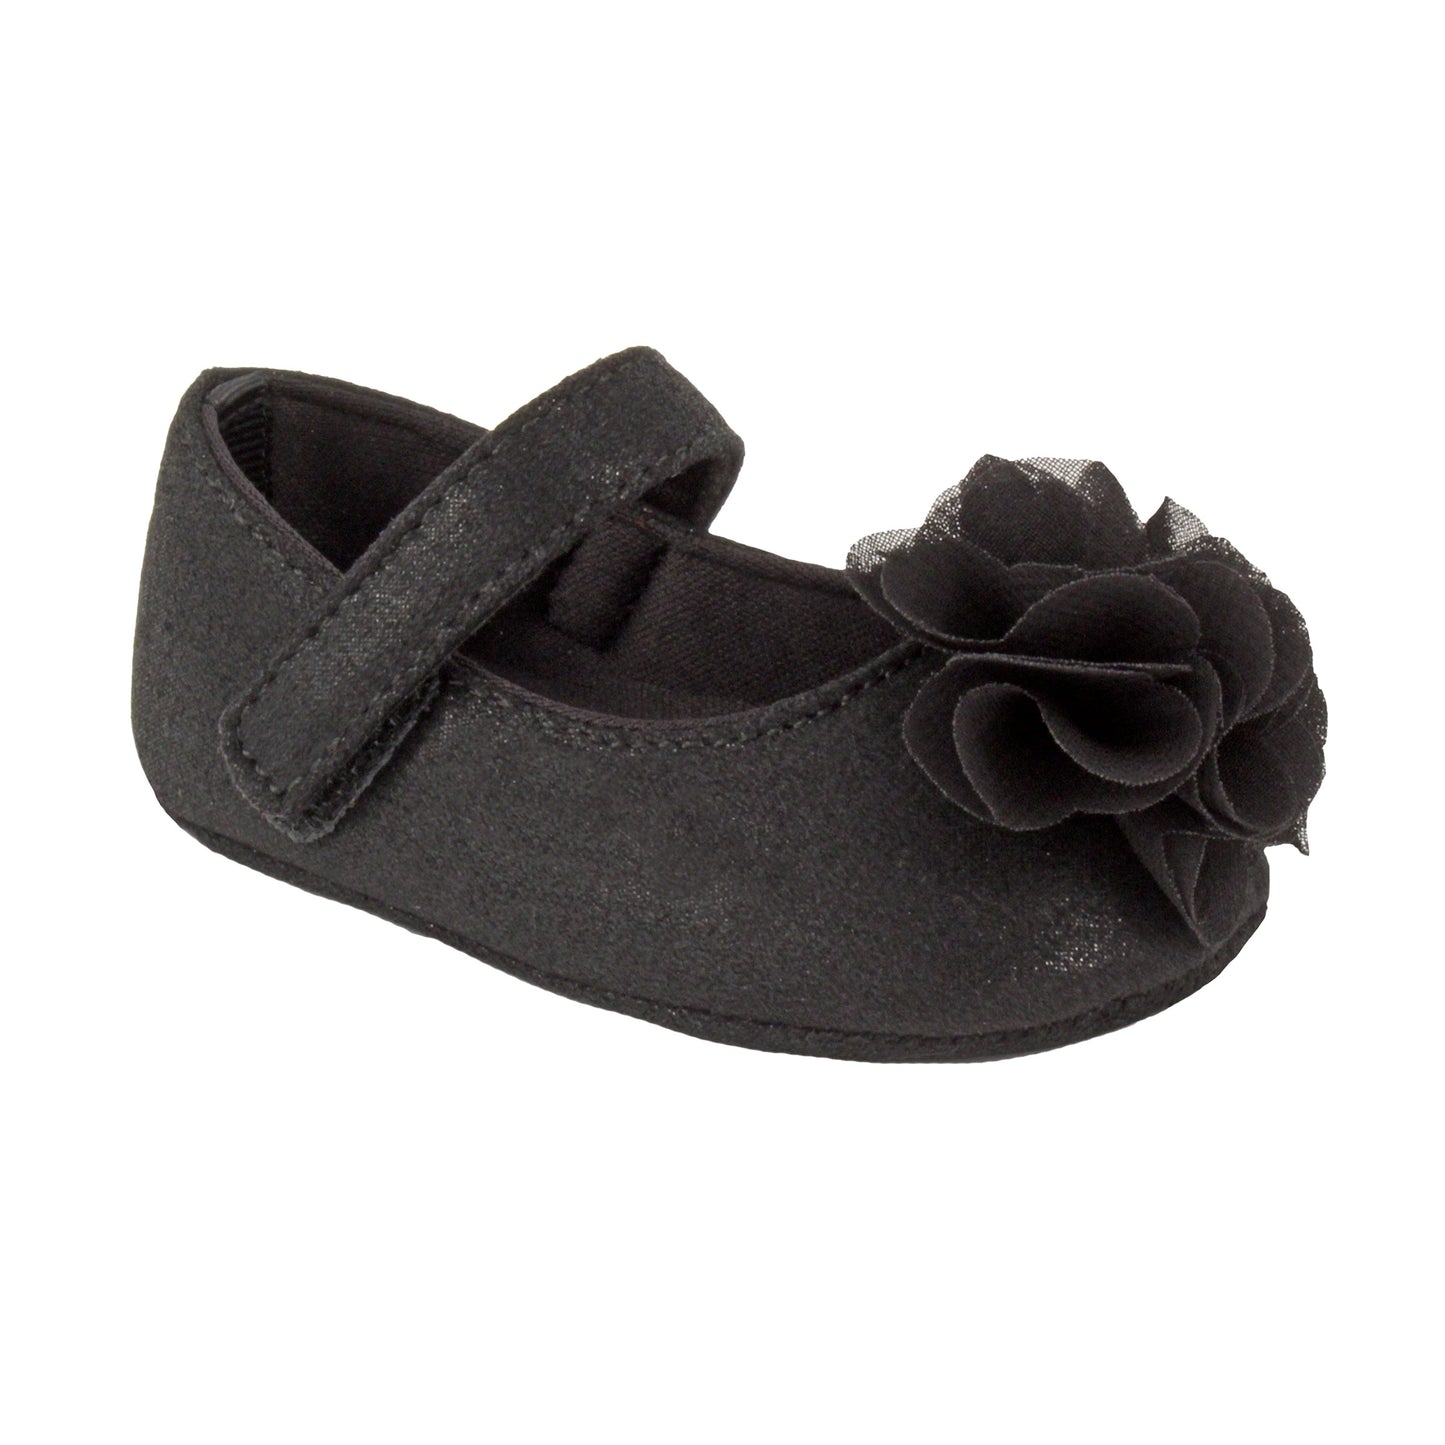 Black Shimmer Shoe with Chiffon Flower